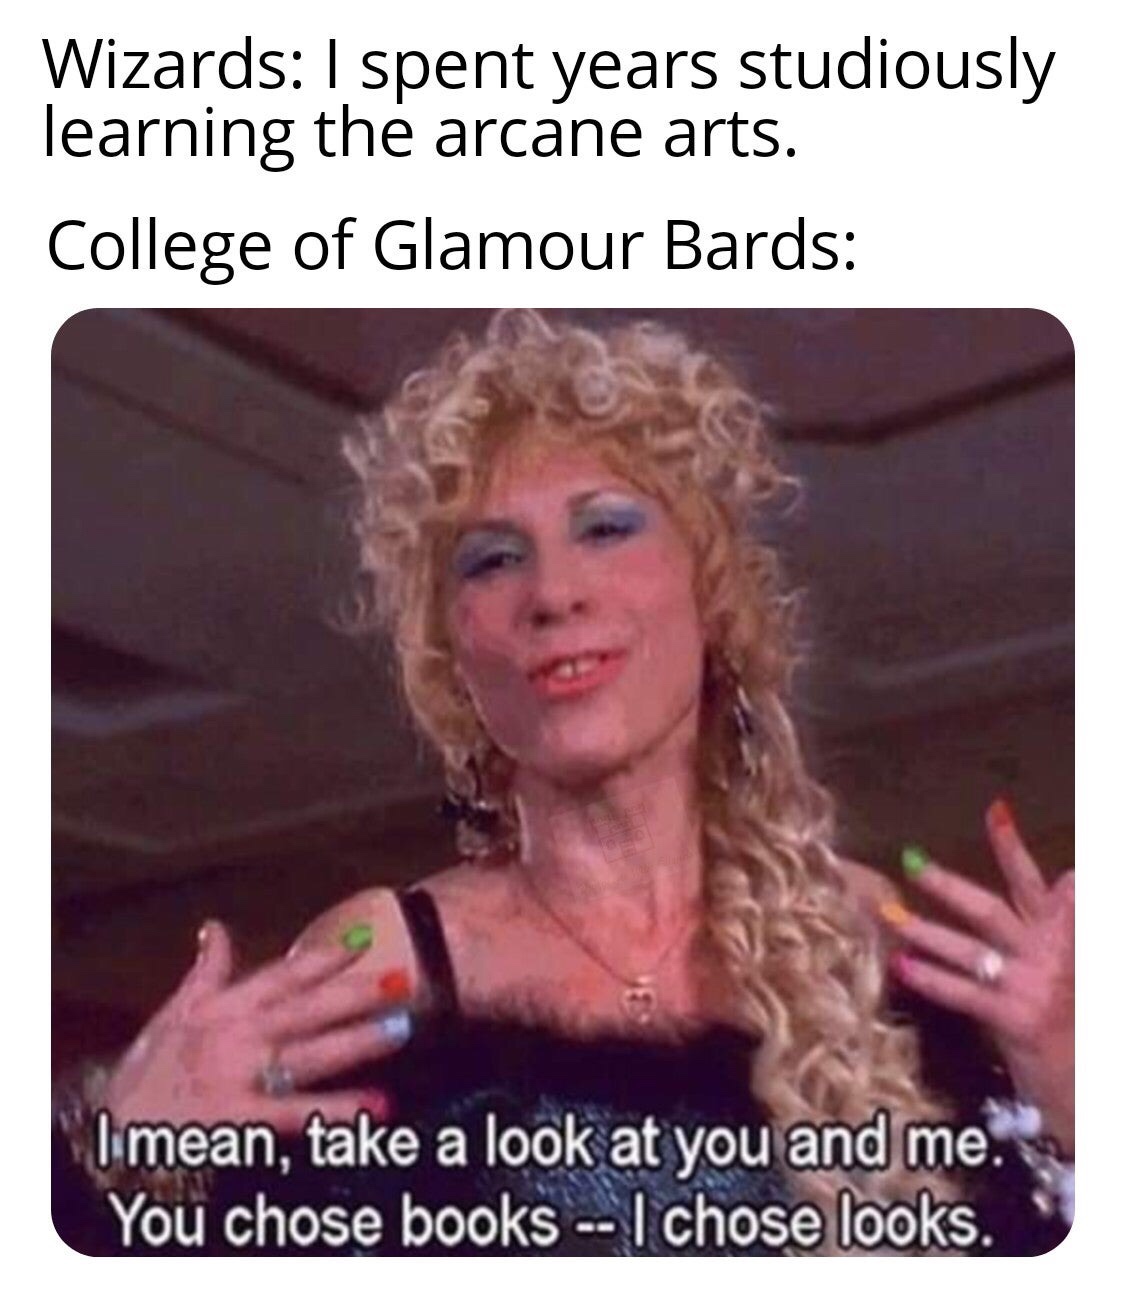 photo caption - Wizards I spent years studiously learning the arcane arts. College of Glamour Bards I mean, take a look at you and me. You chose books I chose looks.